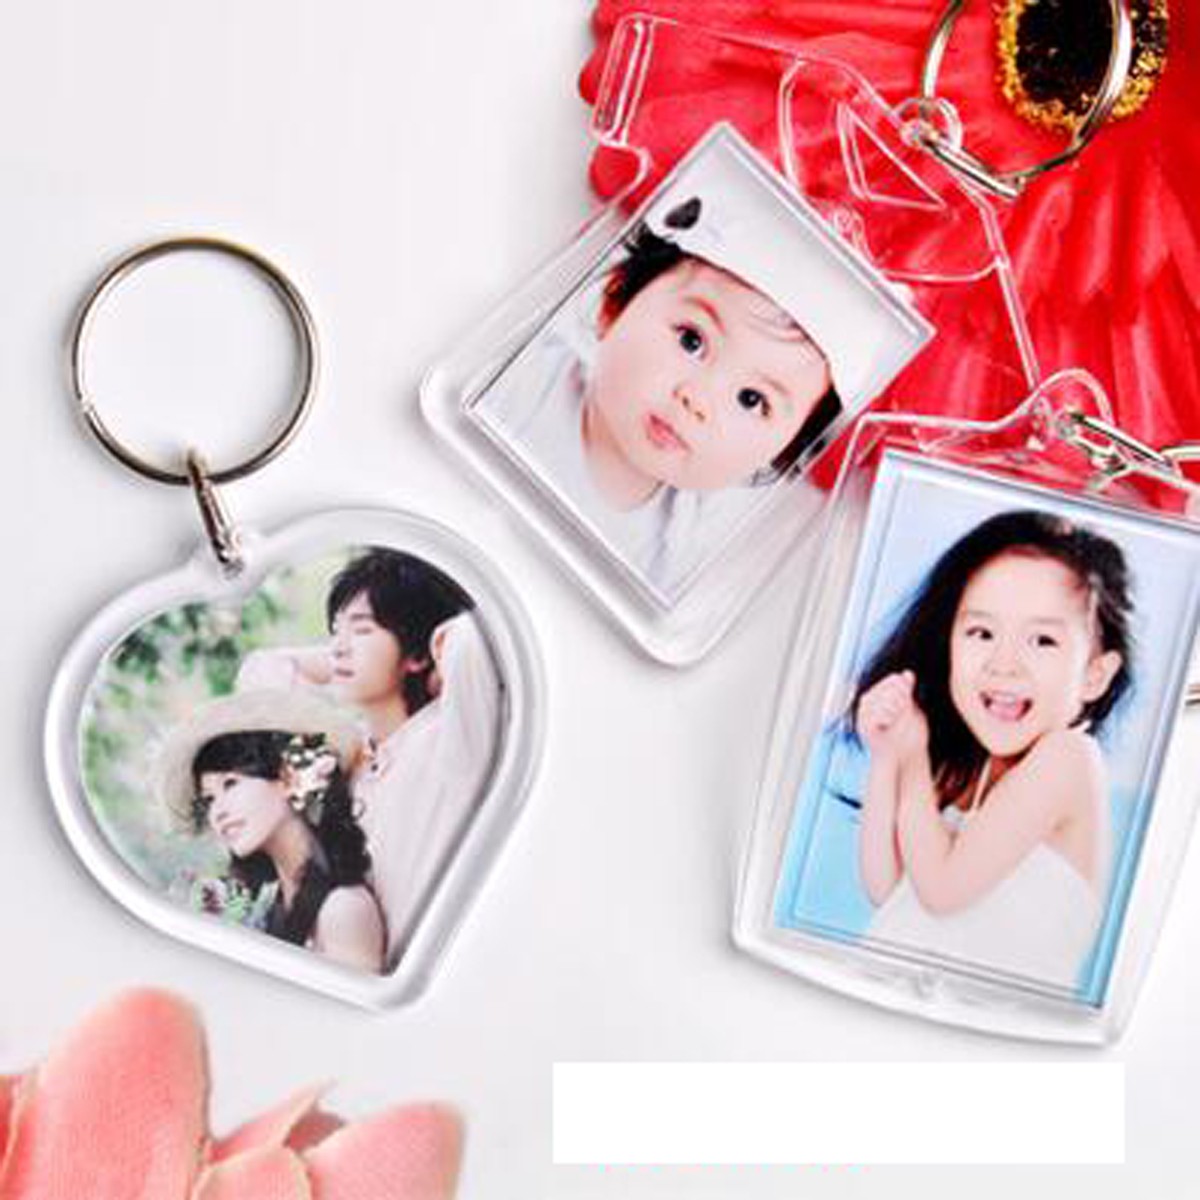 Photos-Pictures-Blank-Key-Ring-Duplex-Keychain-1036881-4